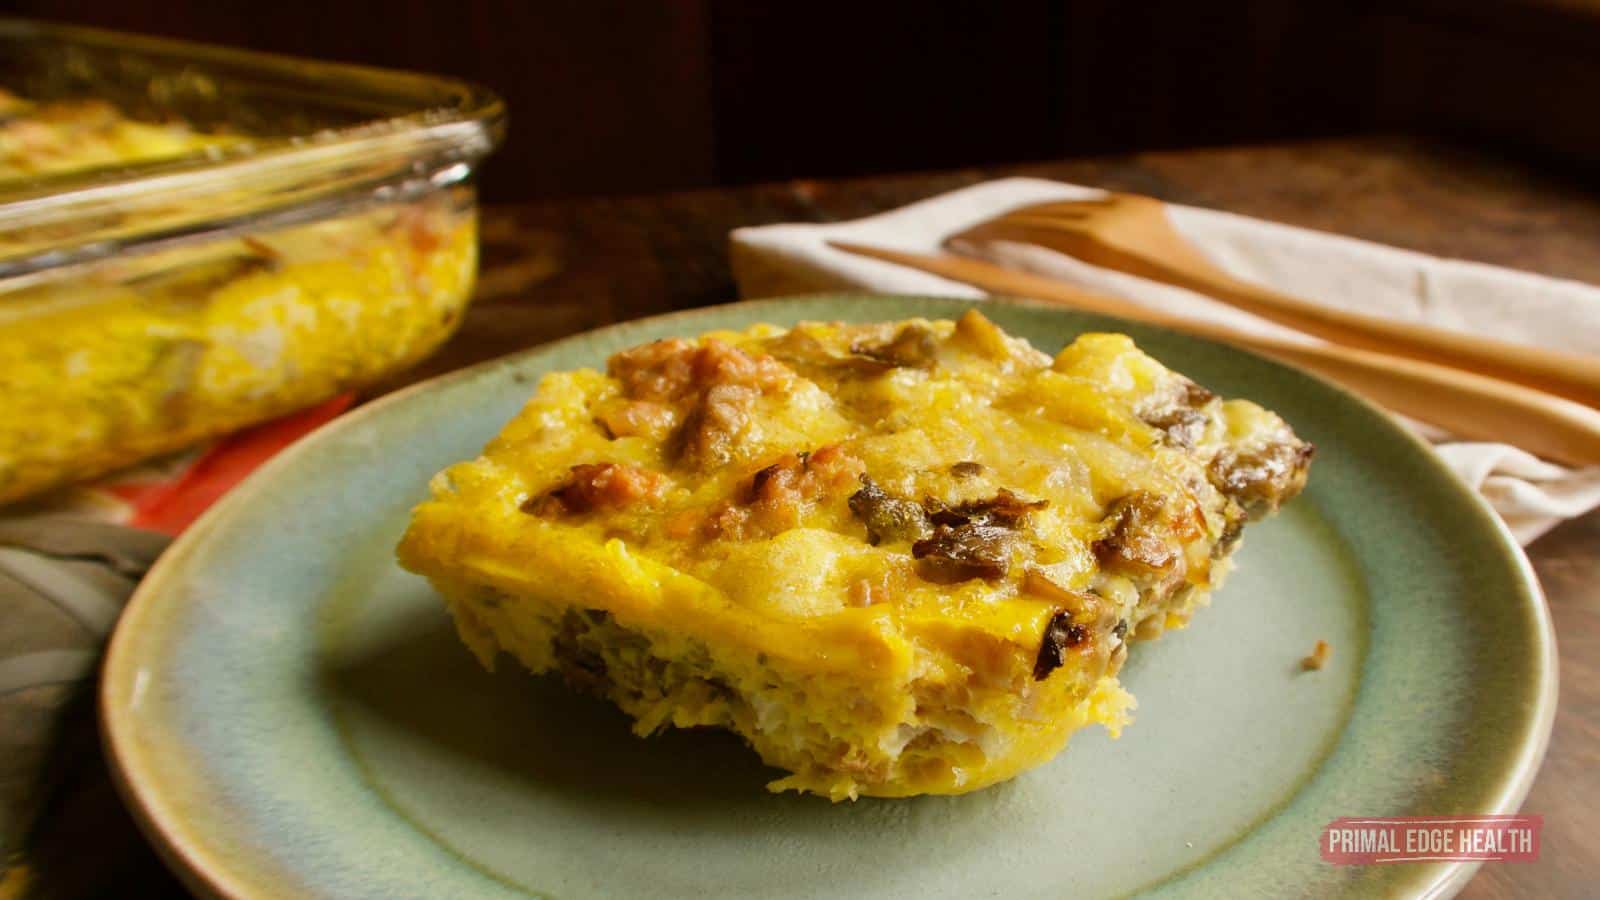 A picture of a portion of keto breakfast casserole on light blue plate.